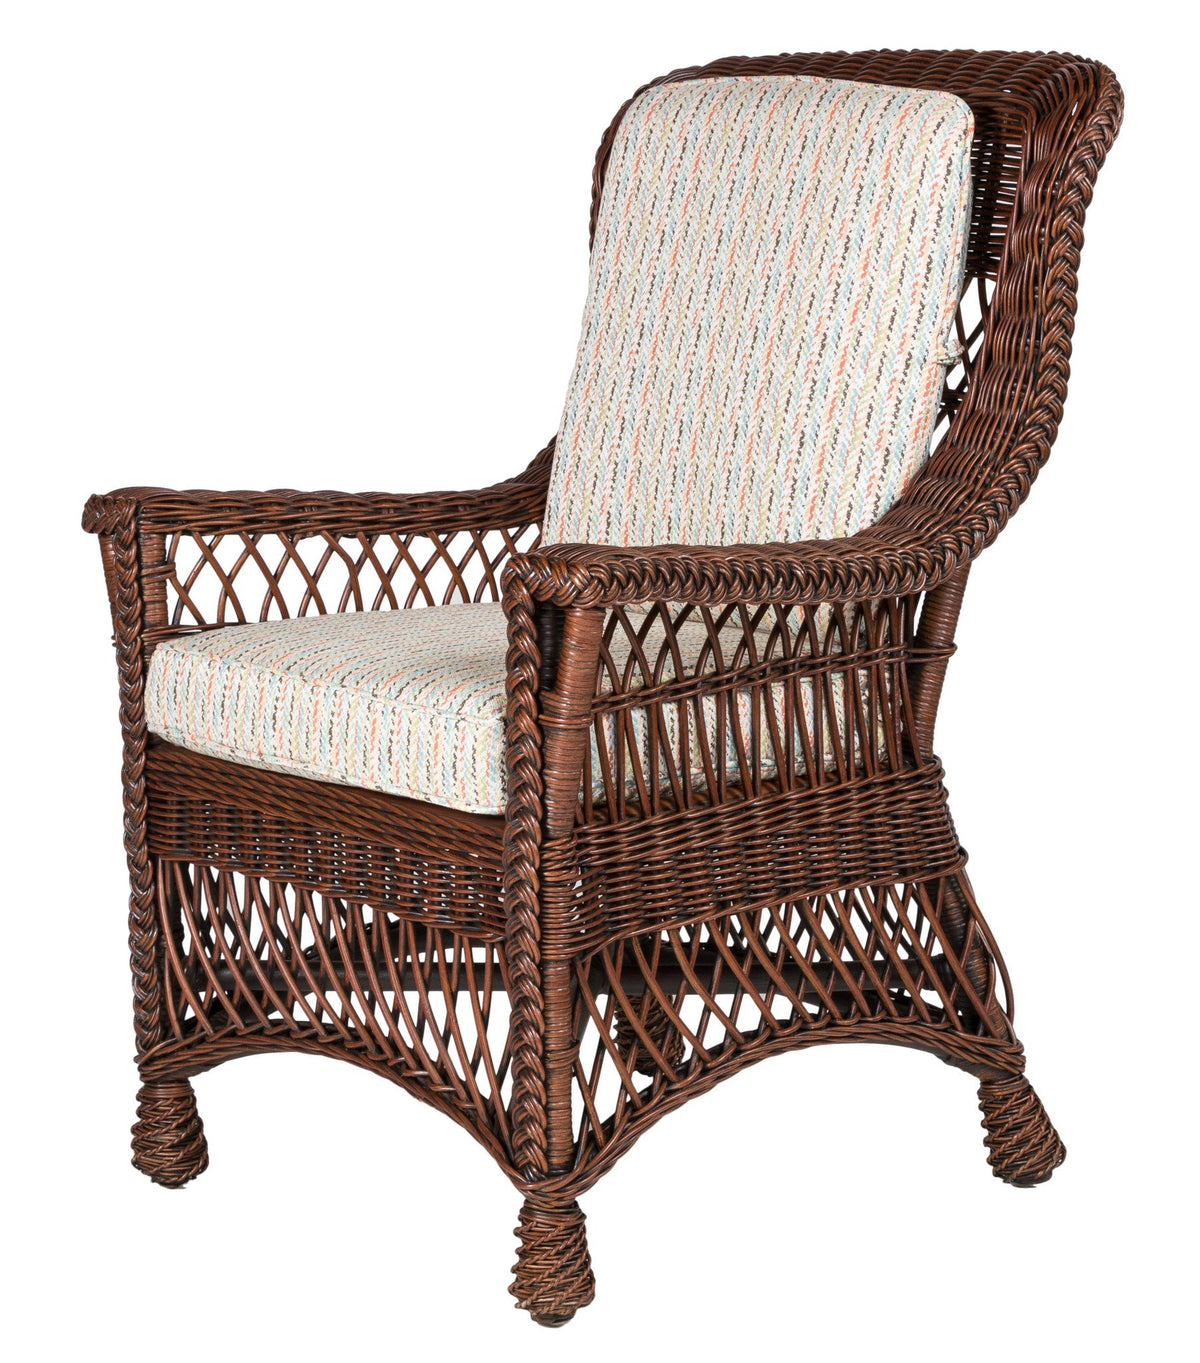 Designer Wicker &amp; Rattan By Tribor Rockport 5 Piece Wicker Dining Set With Glass Top by Designer Wicker &amp; Rattan by Tribor Dining Set - Rattan Imports